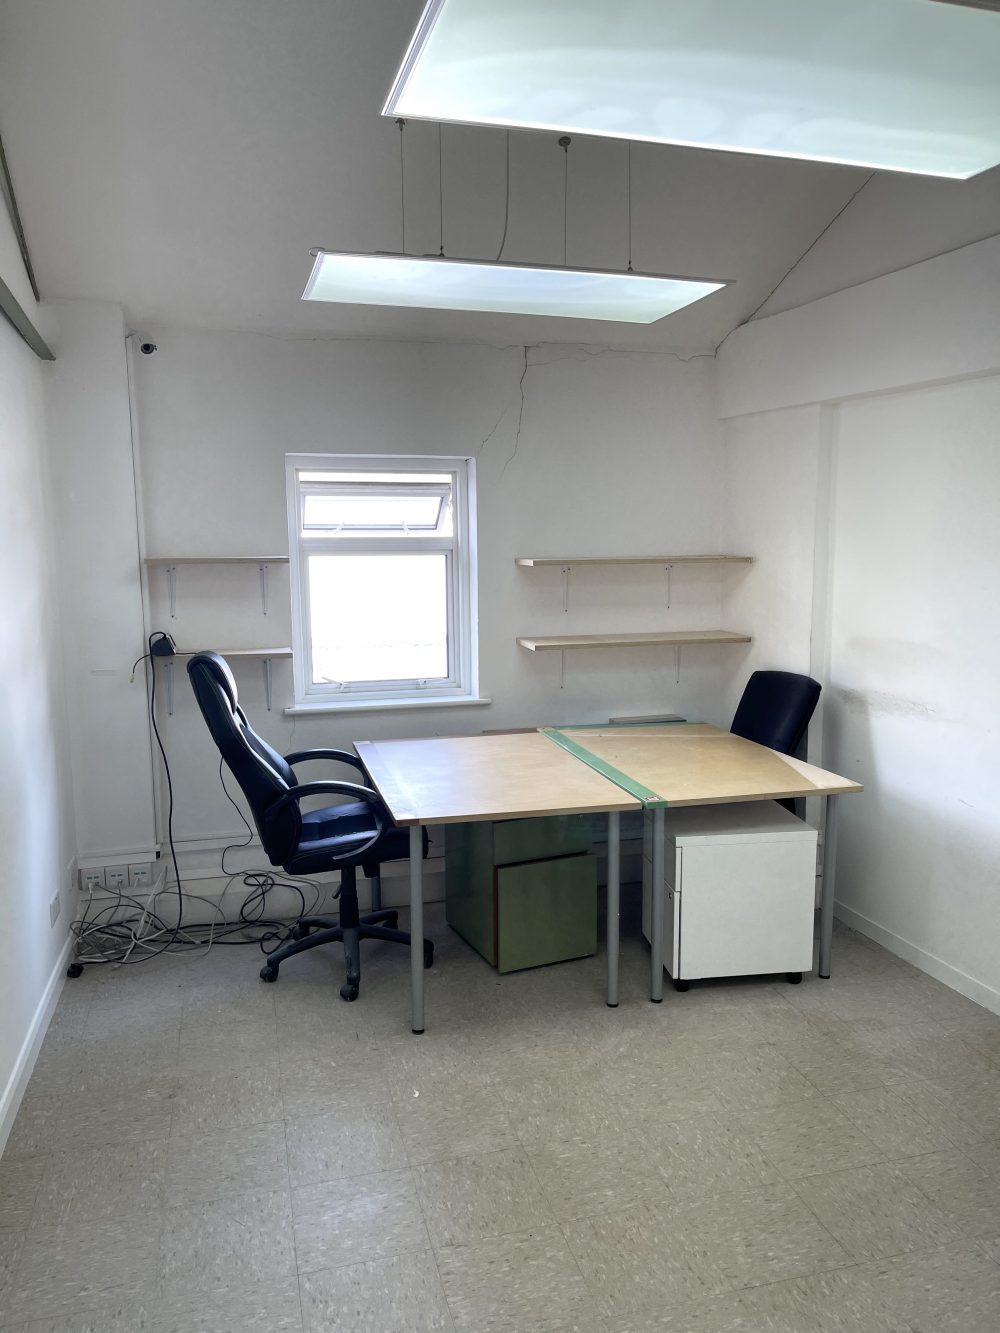 Studio Available to rent in N16 Green Lane Pic7